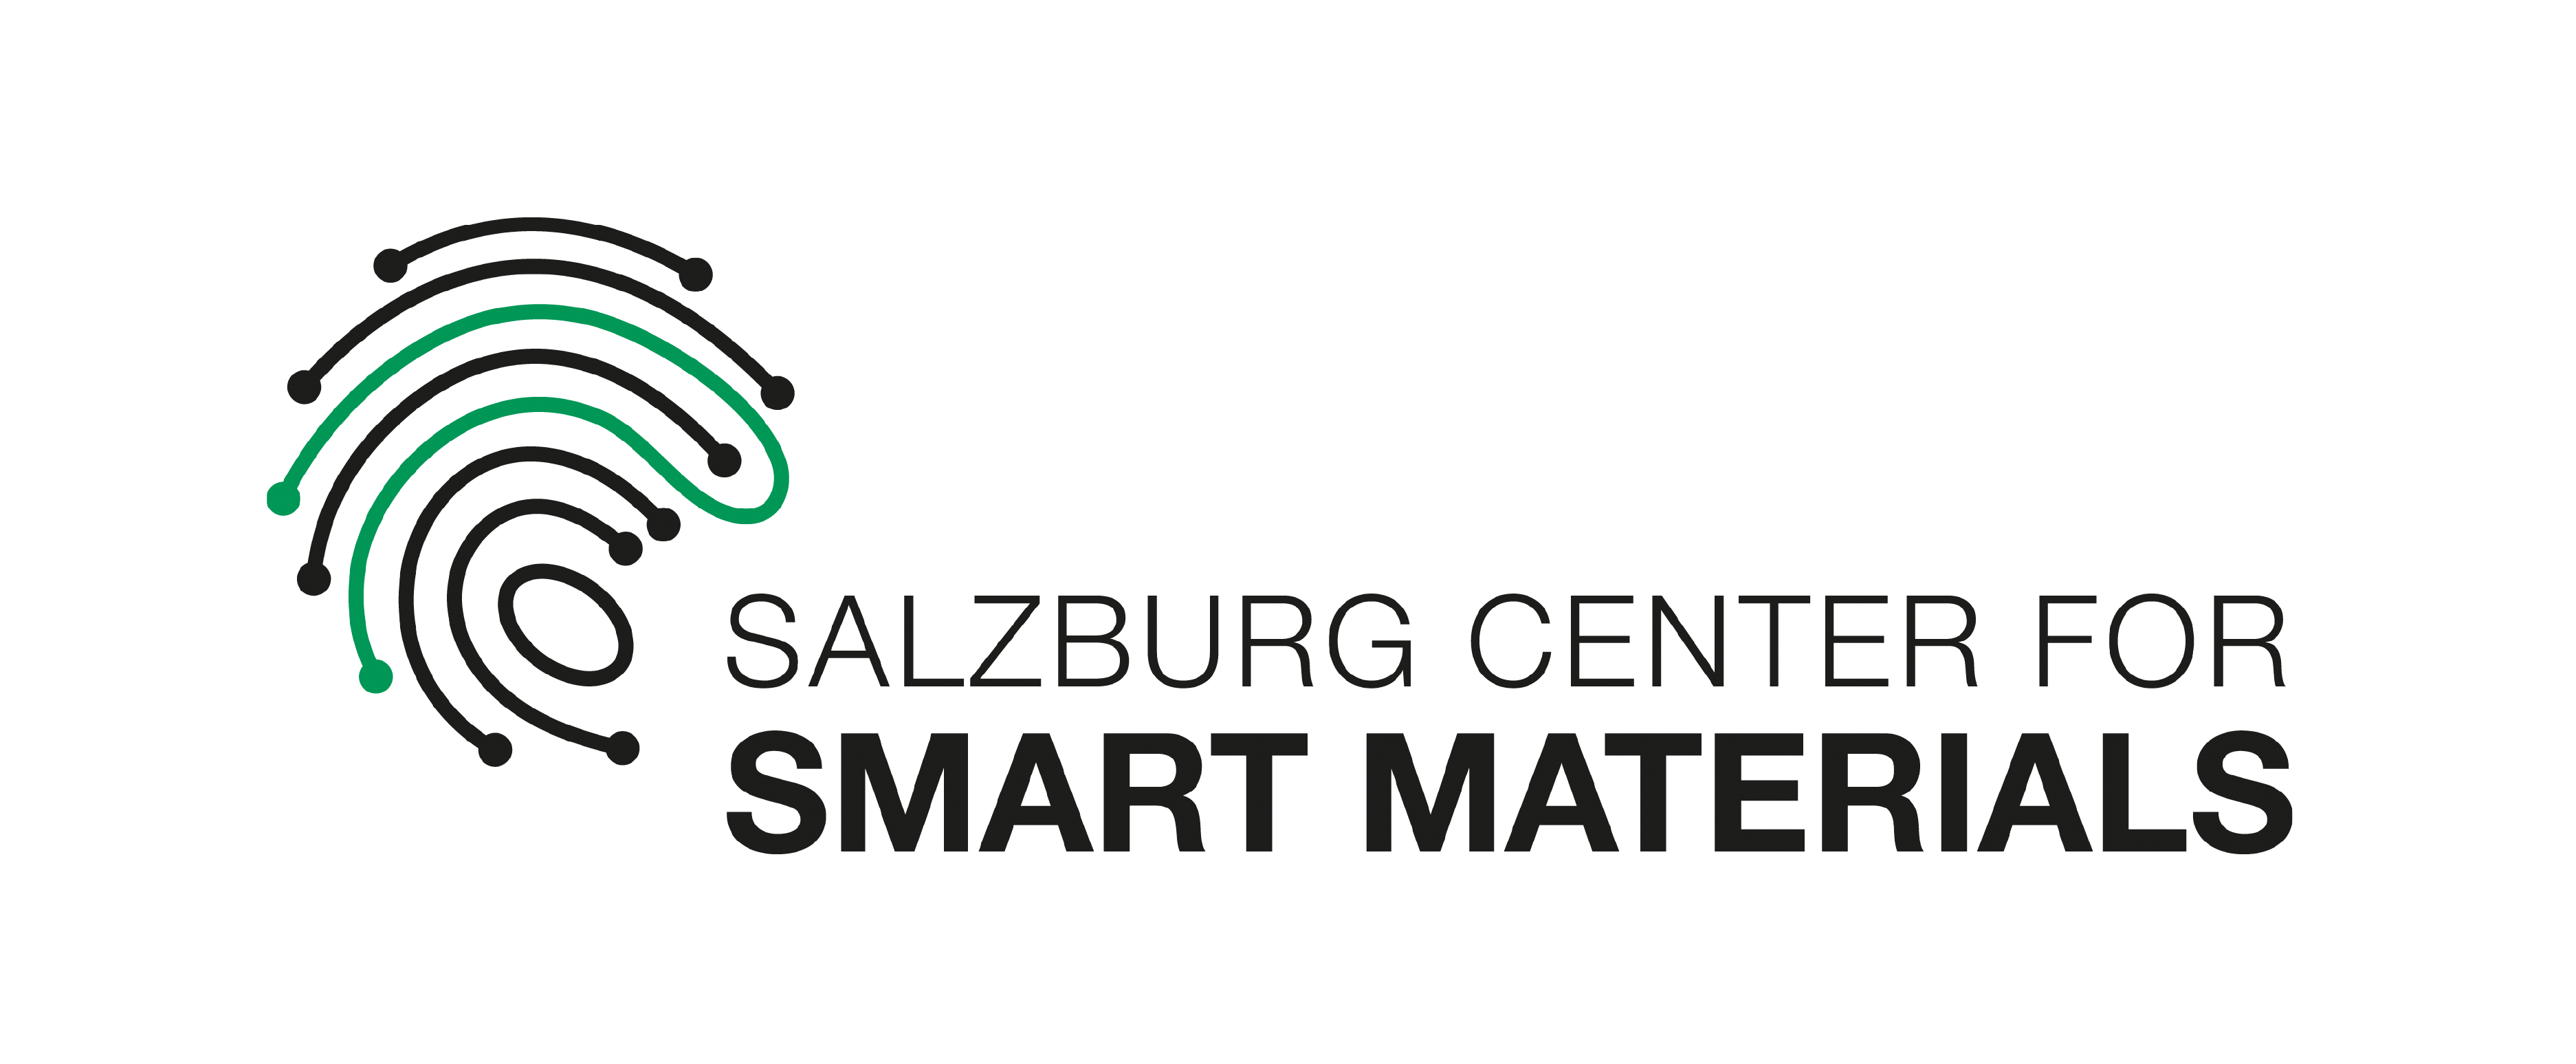 2nd Conference for Smart Materials